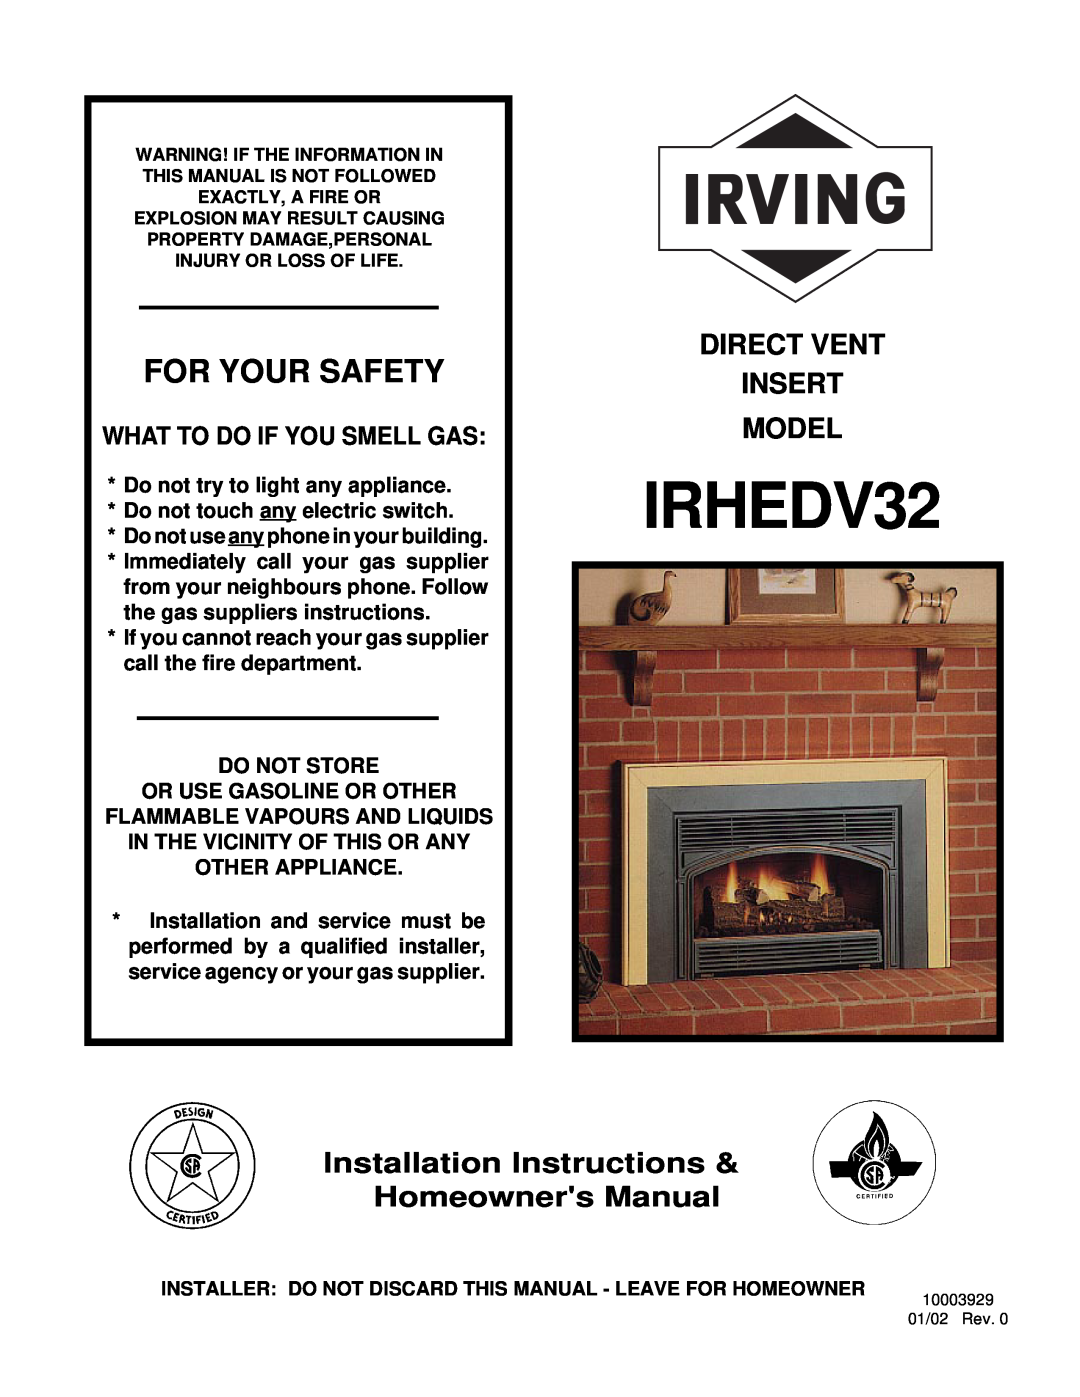 Vermont Casting IRHEDV32 installation instructions What To Do If You Smell Gas, For Your Safety, Direct Vent Insert Model 